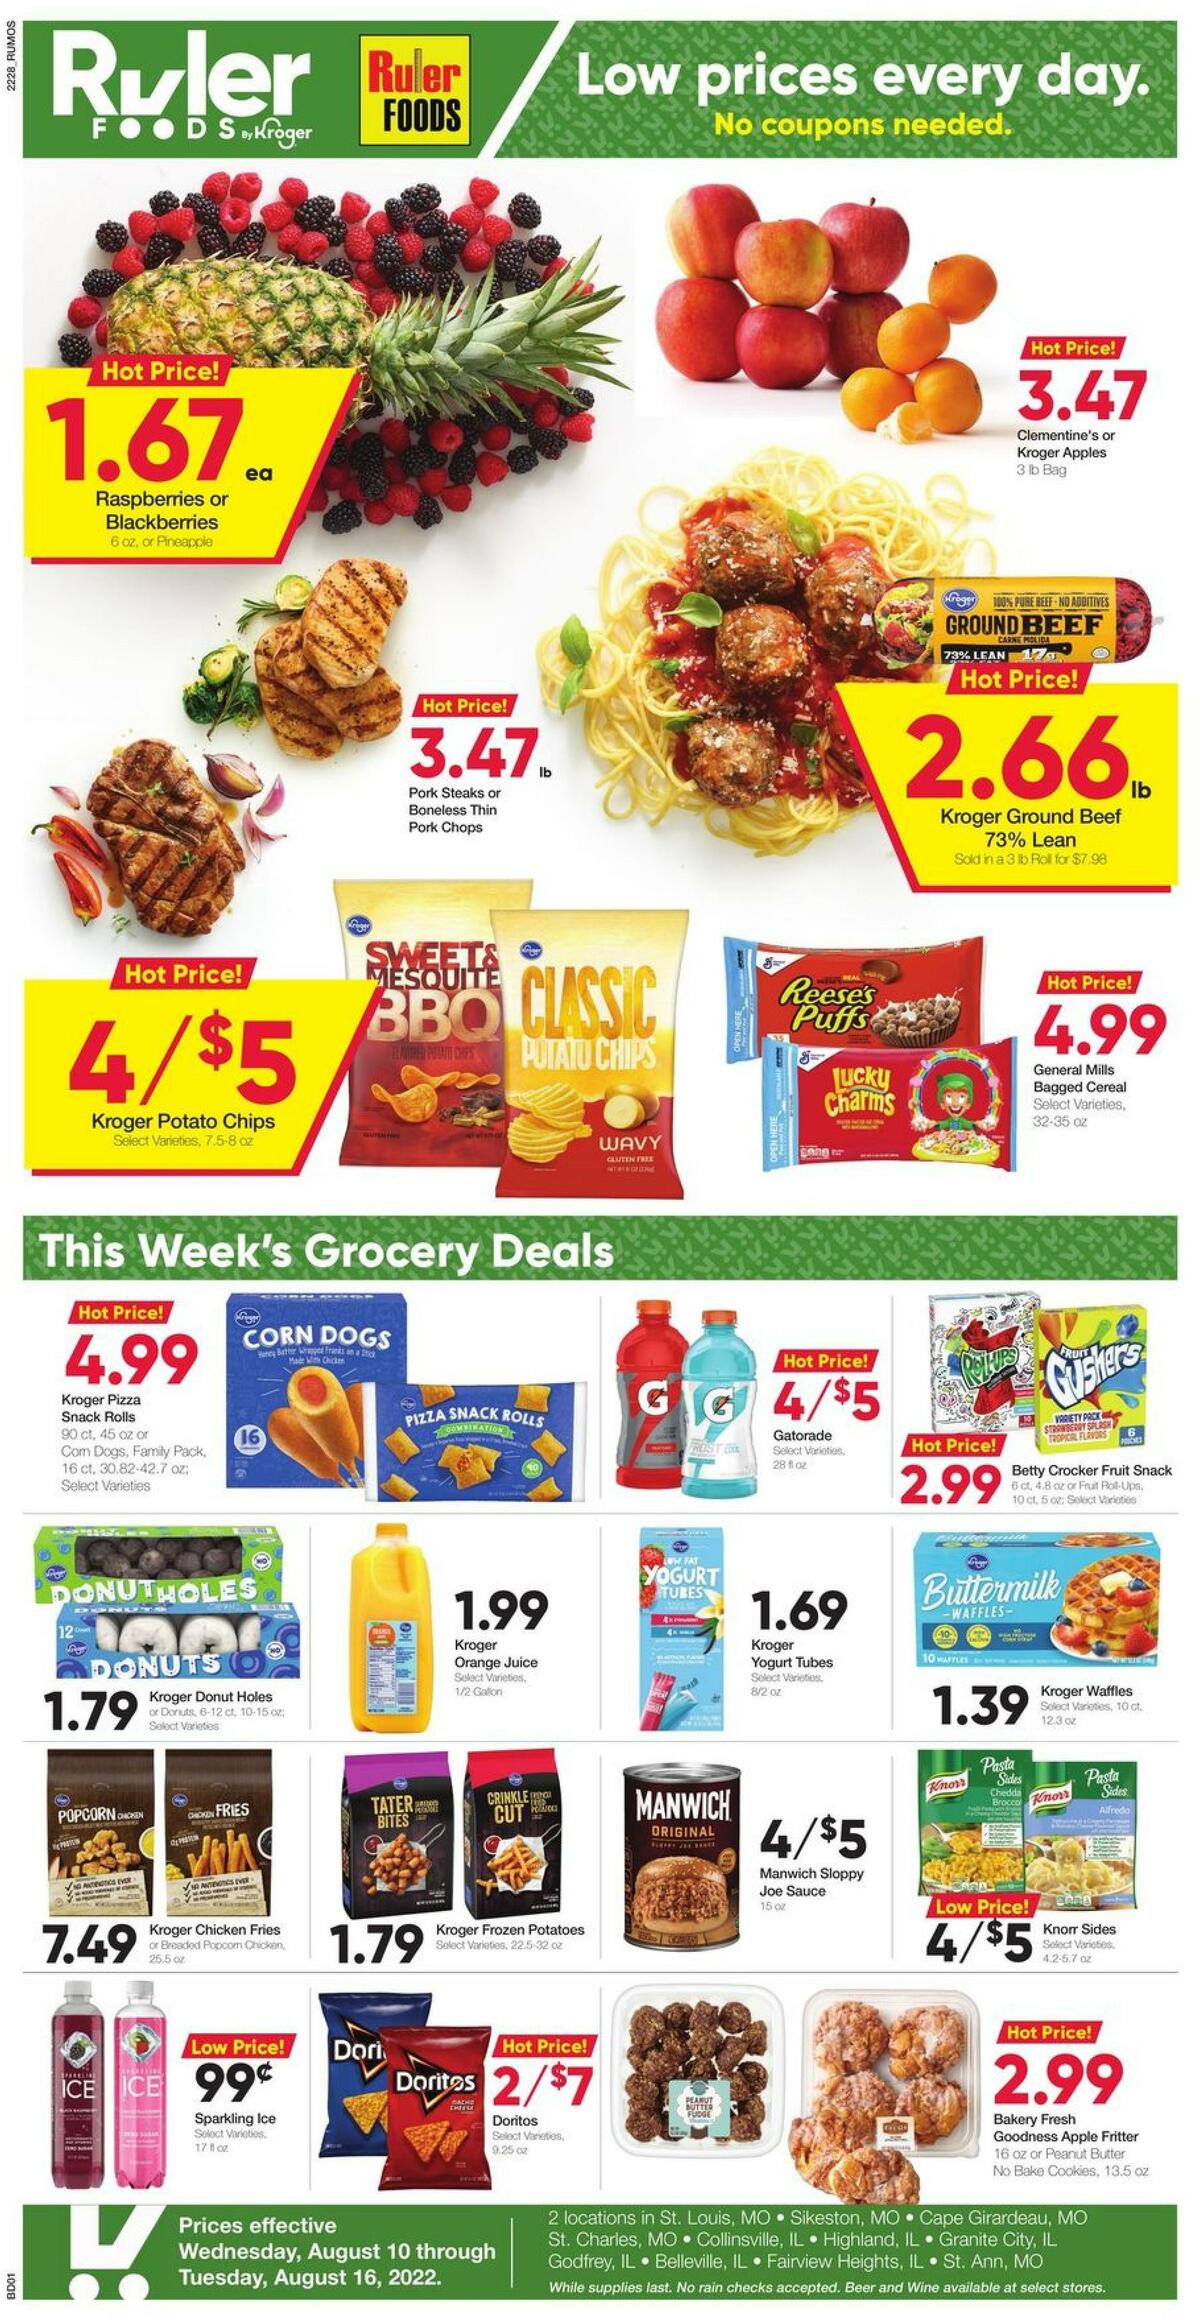 Ruler Foods Weekly Ad from August 10